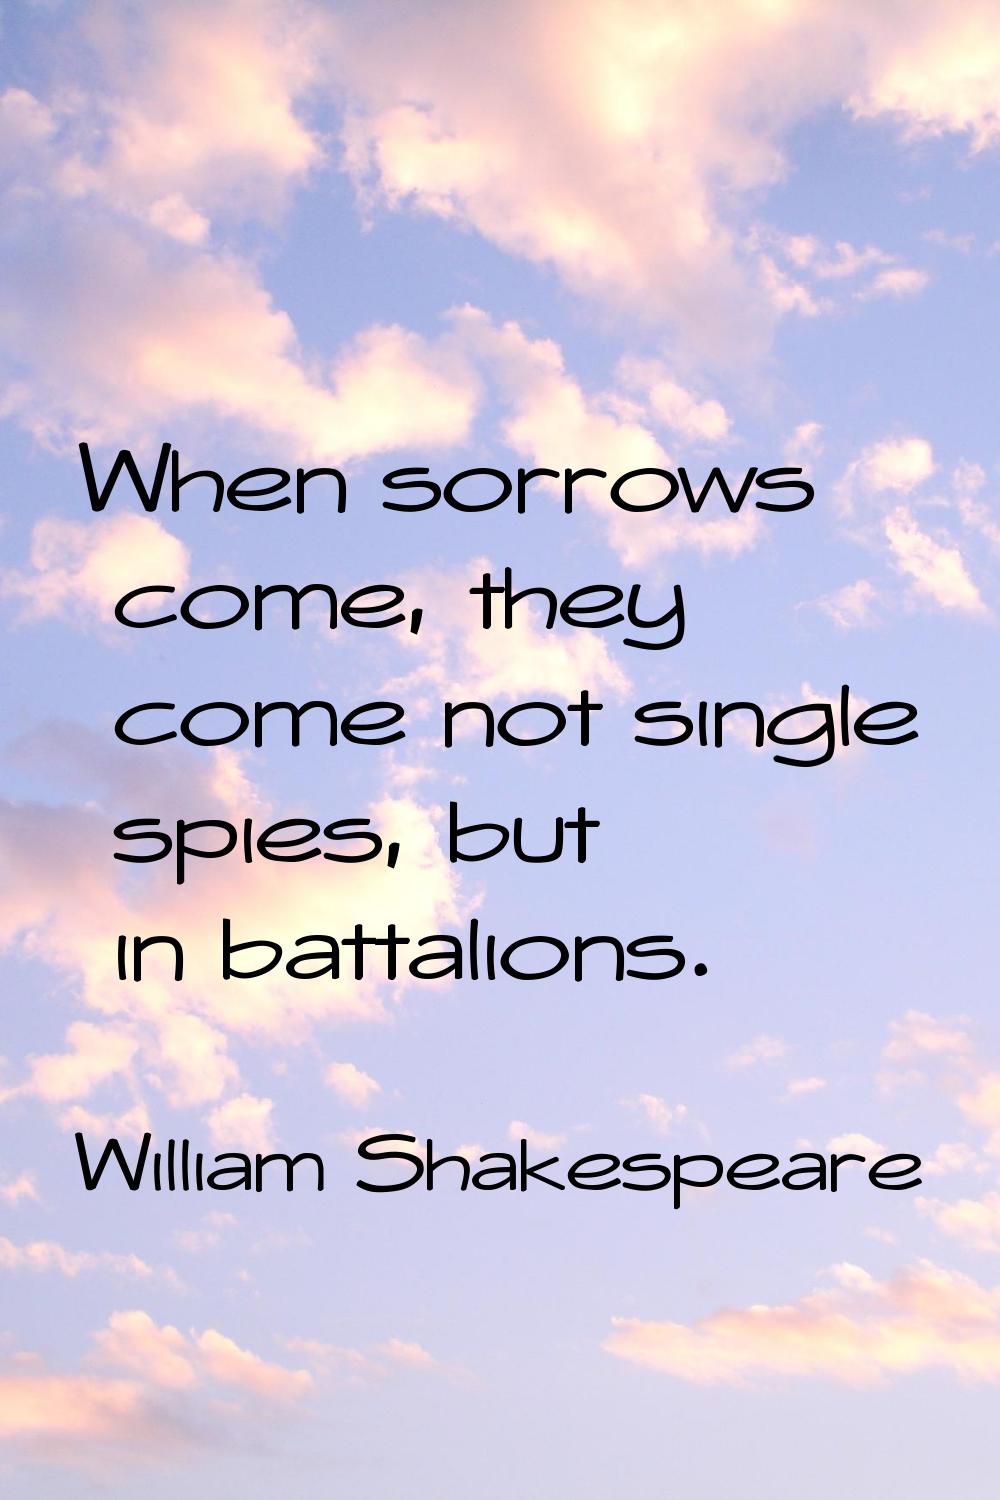 When sorrows come, they come not single spies, but in battalions.